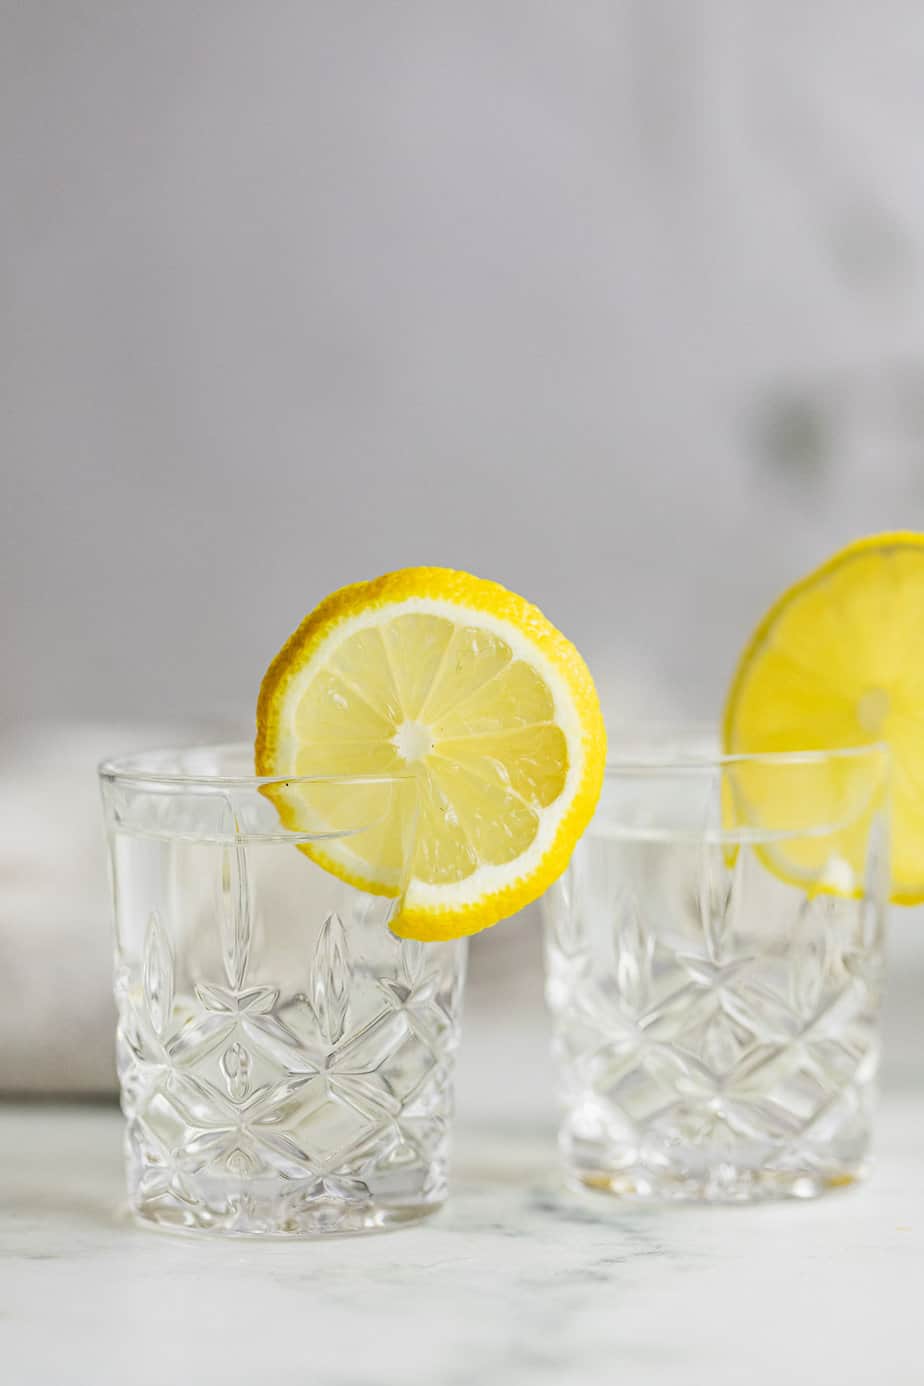 two shot glasses filled with vodka and topped with lemon slices